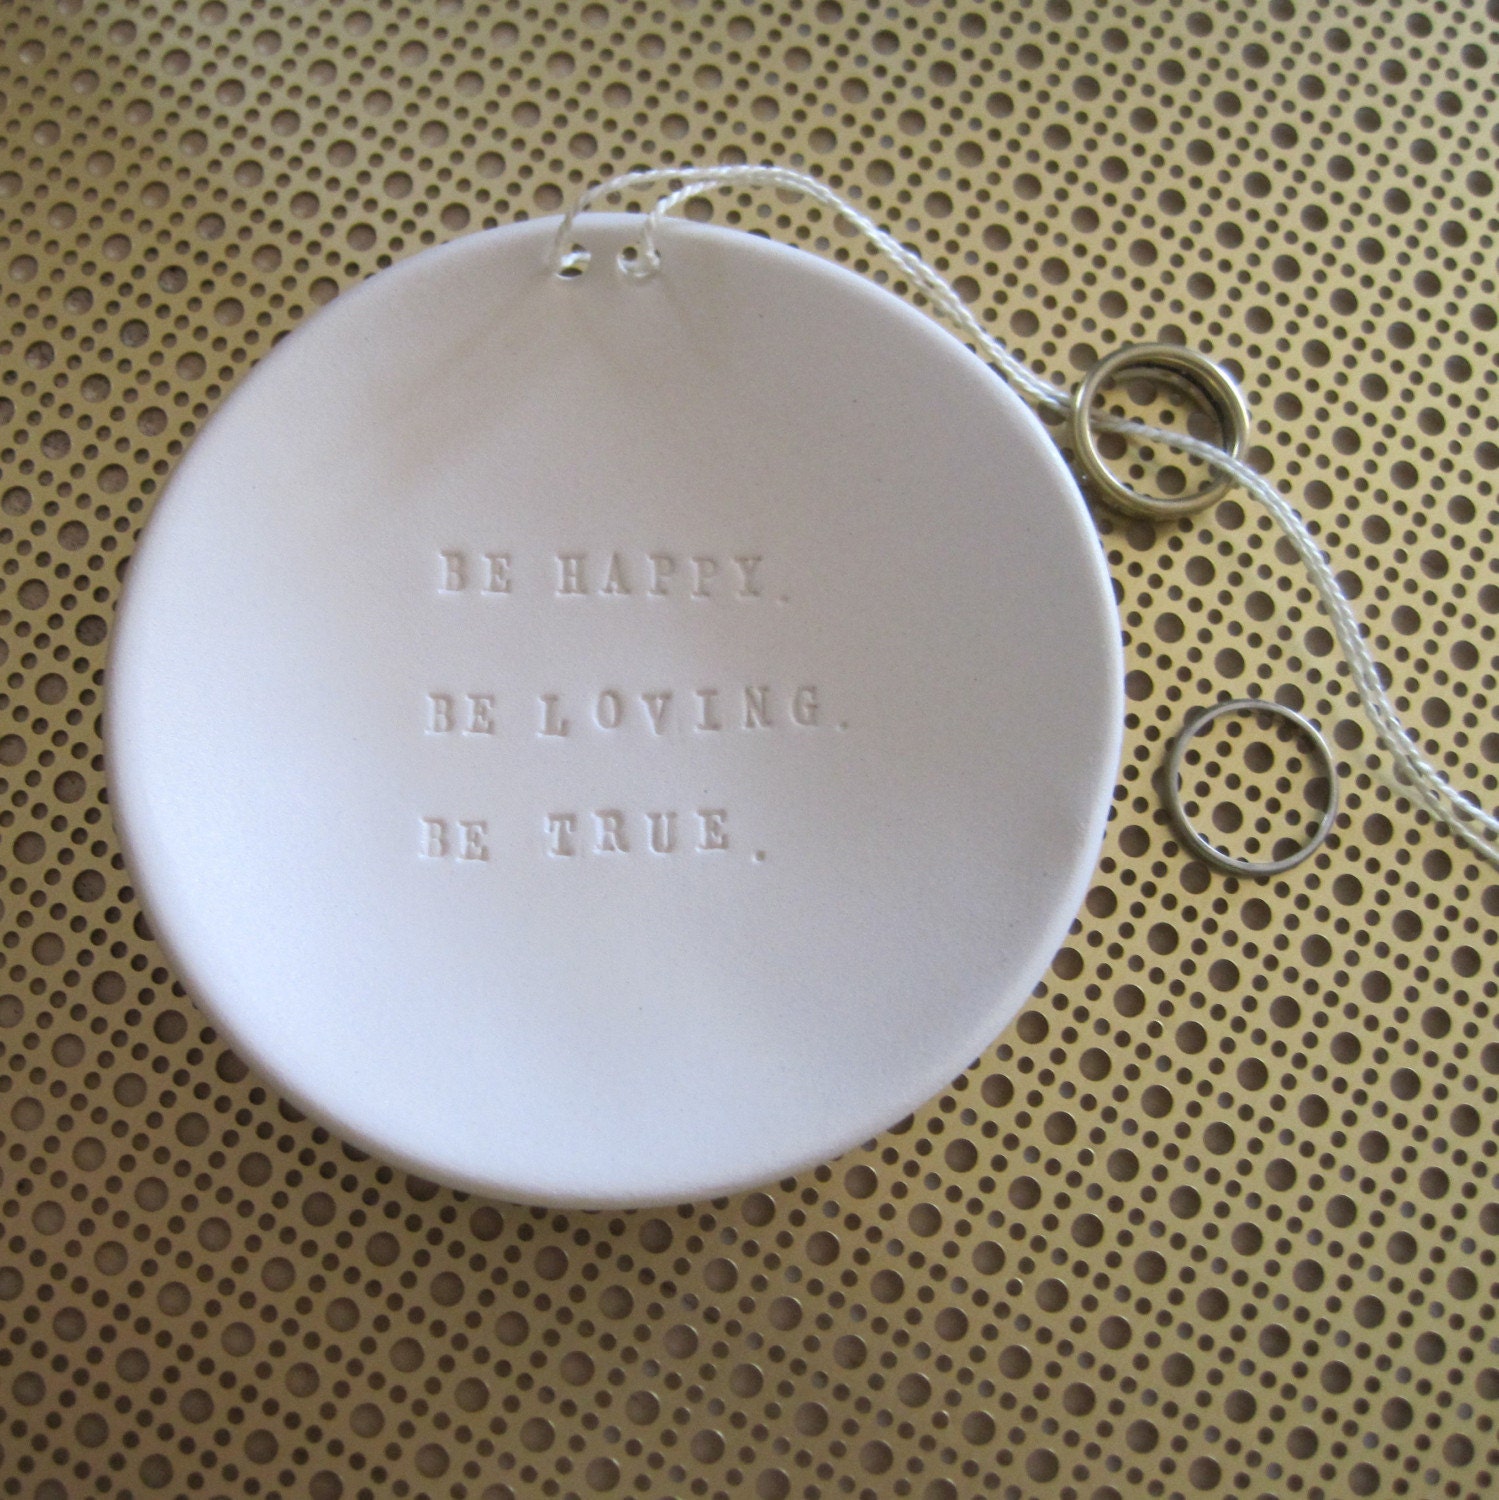 Be Happy. Be Loving. Be True.  Ring Bearer Bowl (TM) wedding or commitment ceremony dish - the original design by Paloma's Nest